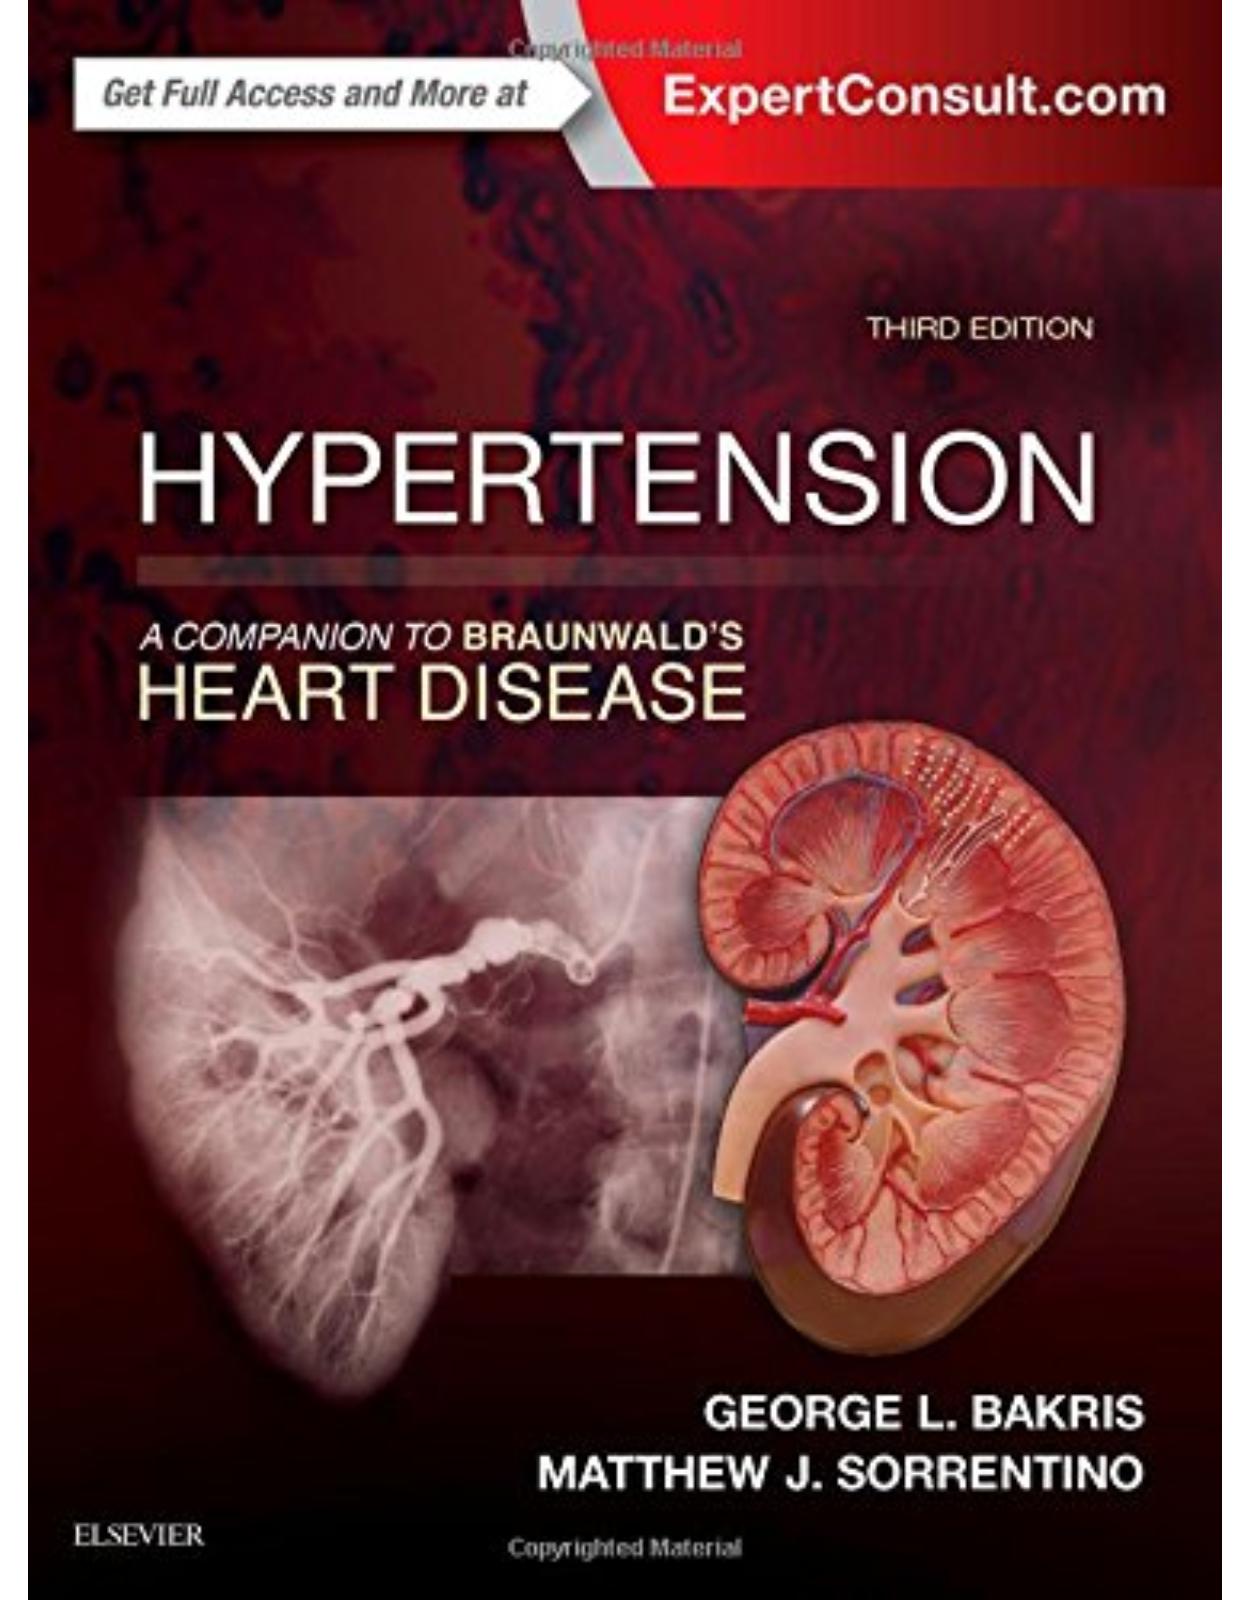 Hypertension: A Companion to Braunwald's Heart Disease, 3rd Edition